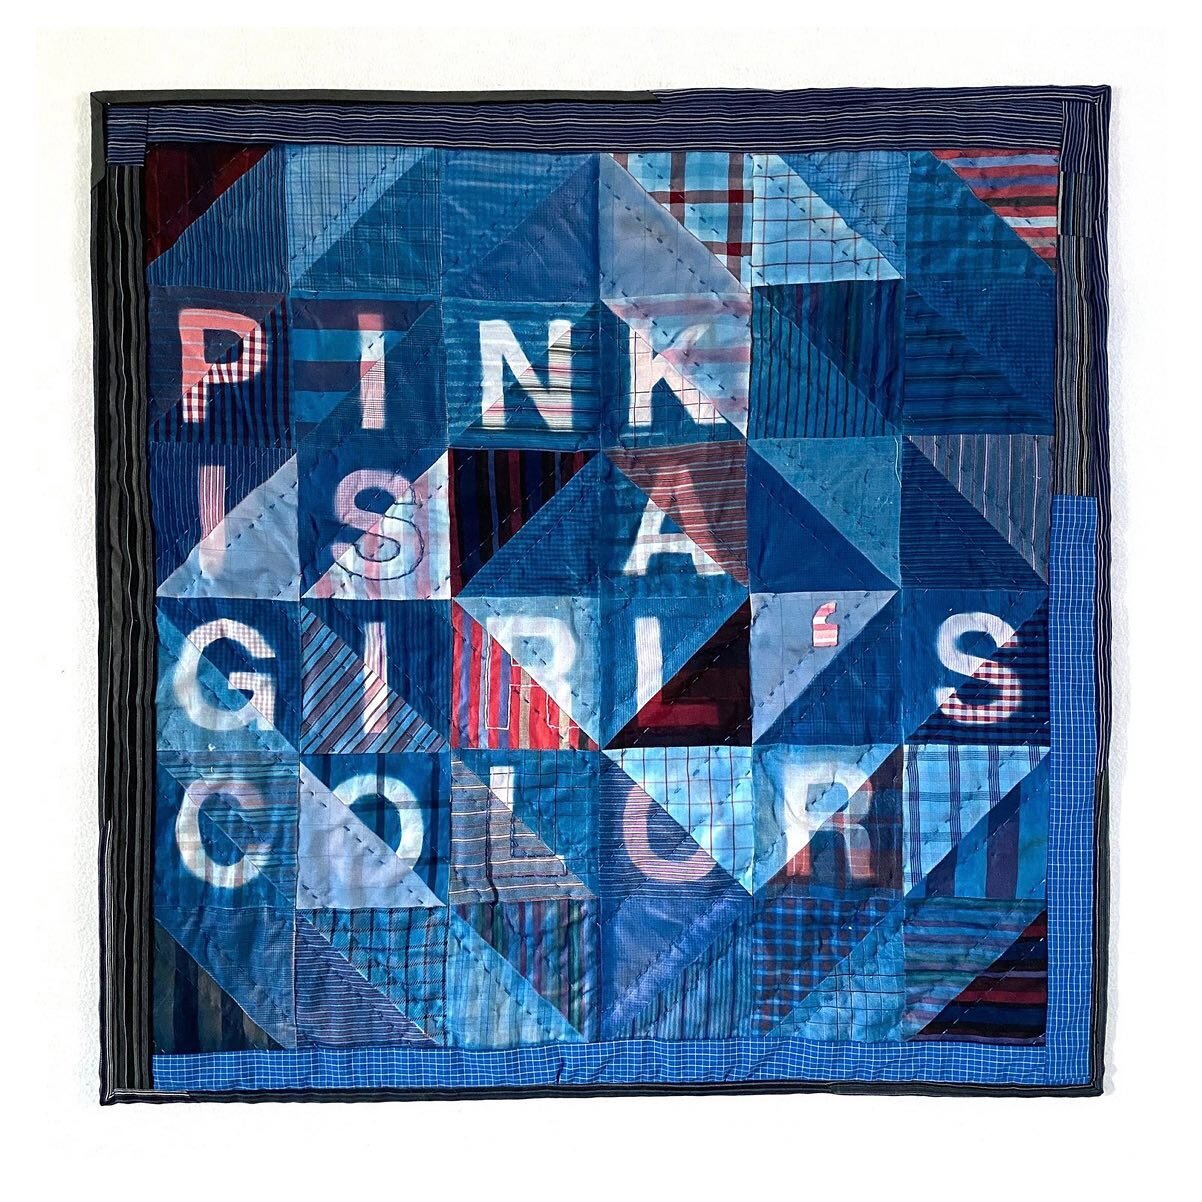 Pink is a Girl&rsquo;s Color, 27&rdquo;x27&rdquo;, cyanotype on repurposed men&rsquo;s dress shirts, hand quilted with appliqu&eacute;